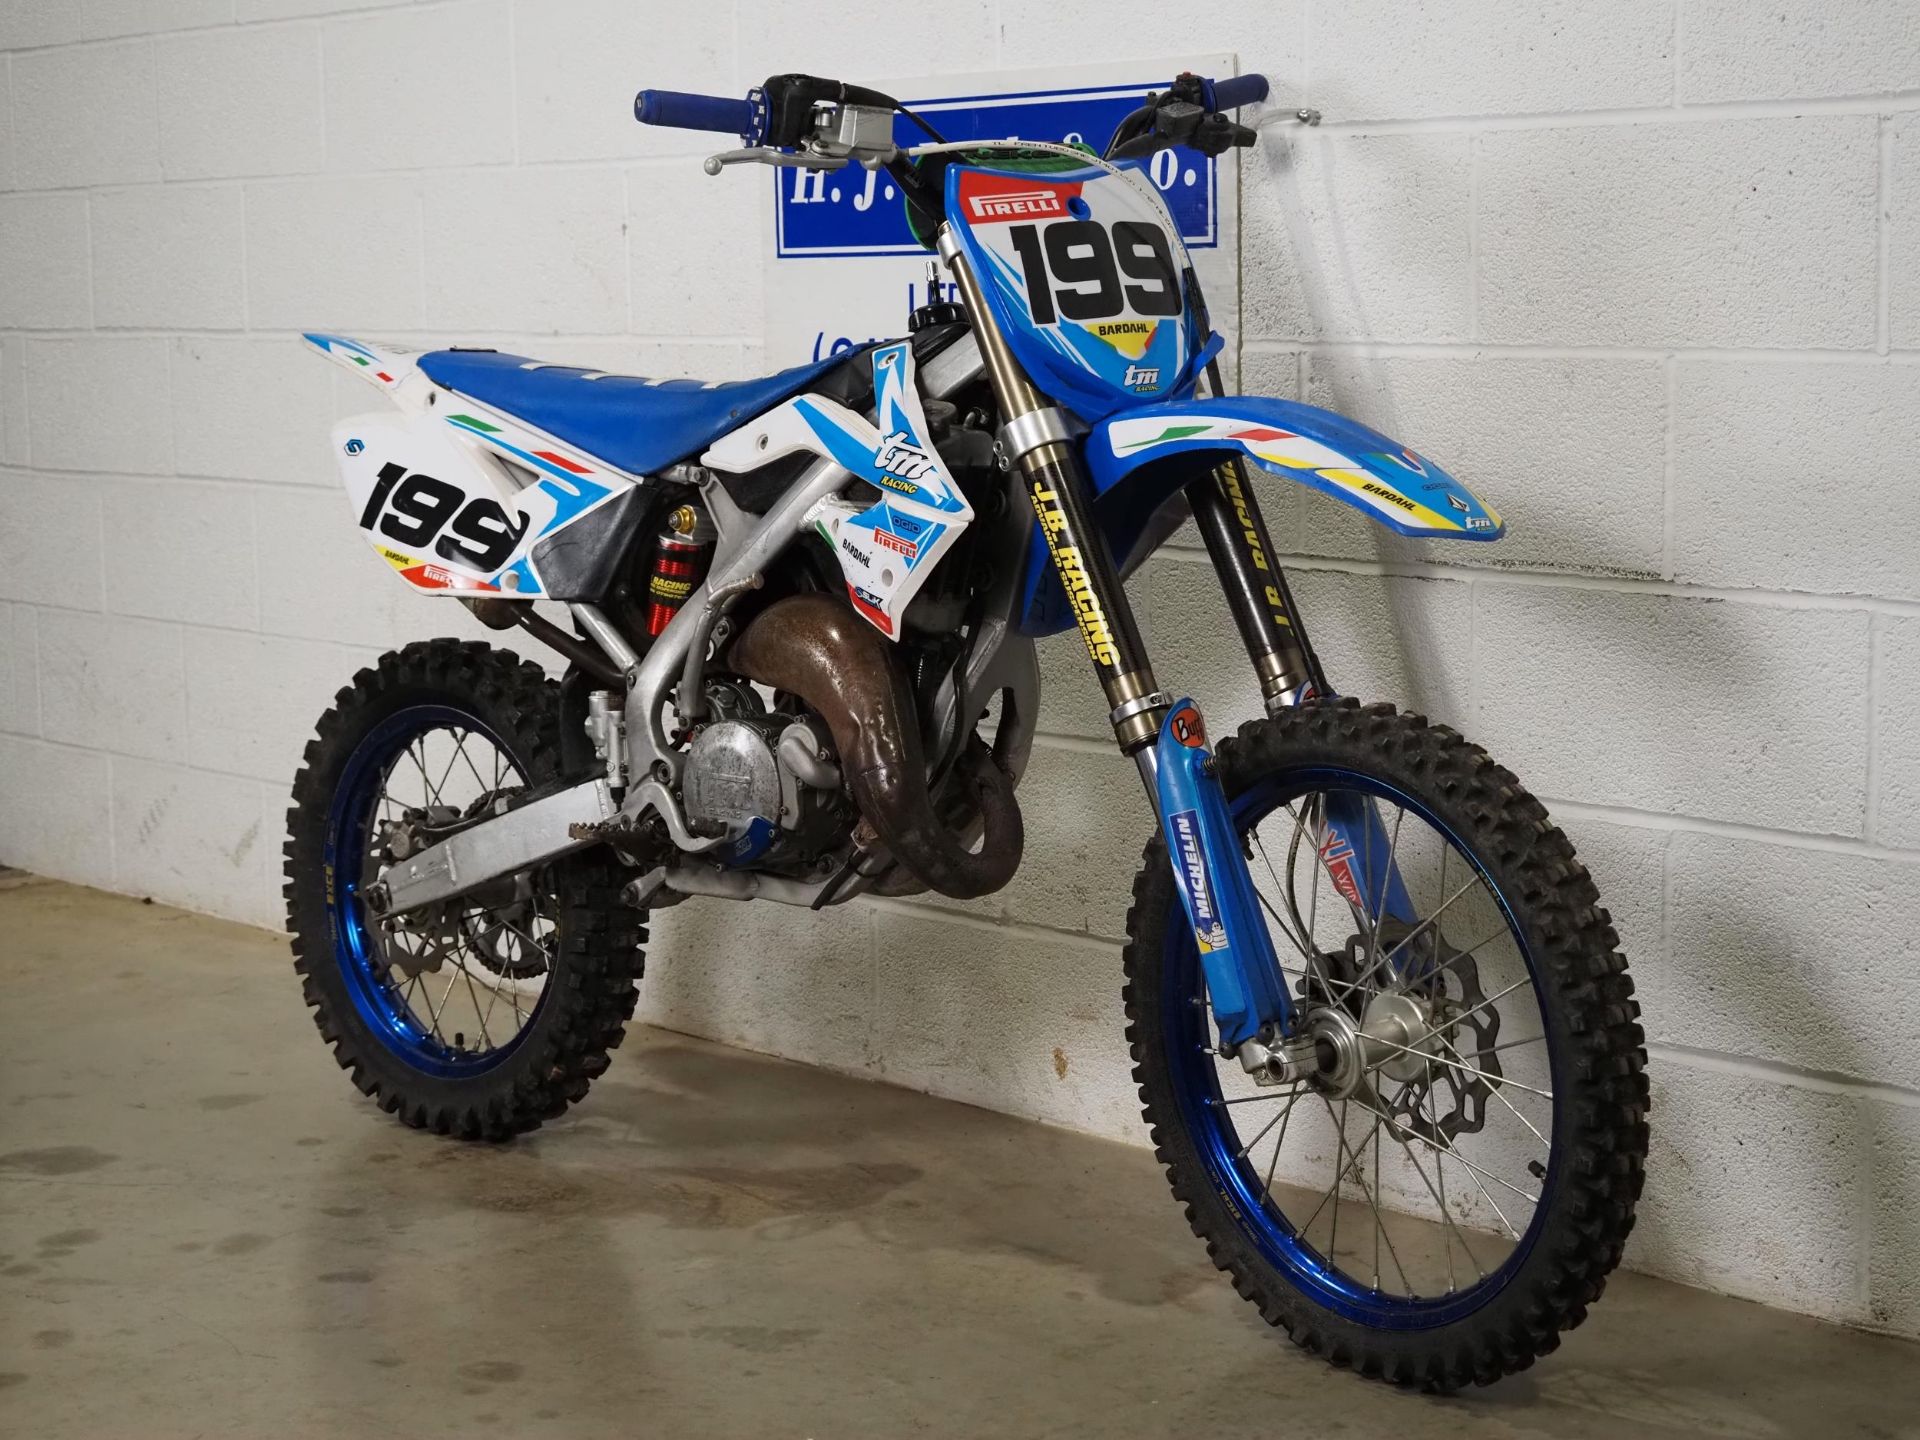 TM85 big wheel moto cross bike. 2015. 85cc Runs and rides. Has had an overhaul by Neil Buttry to - Image 2 of 5